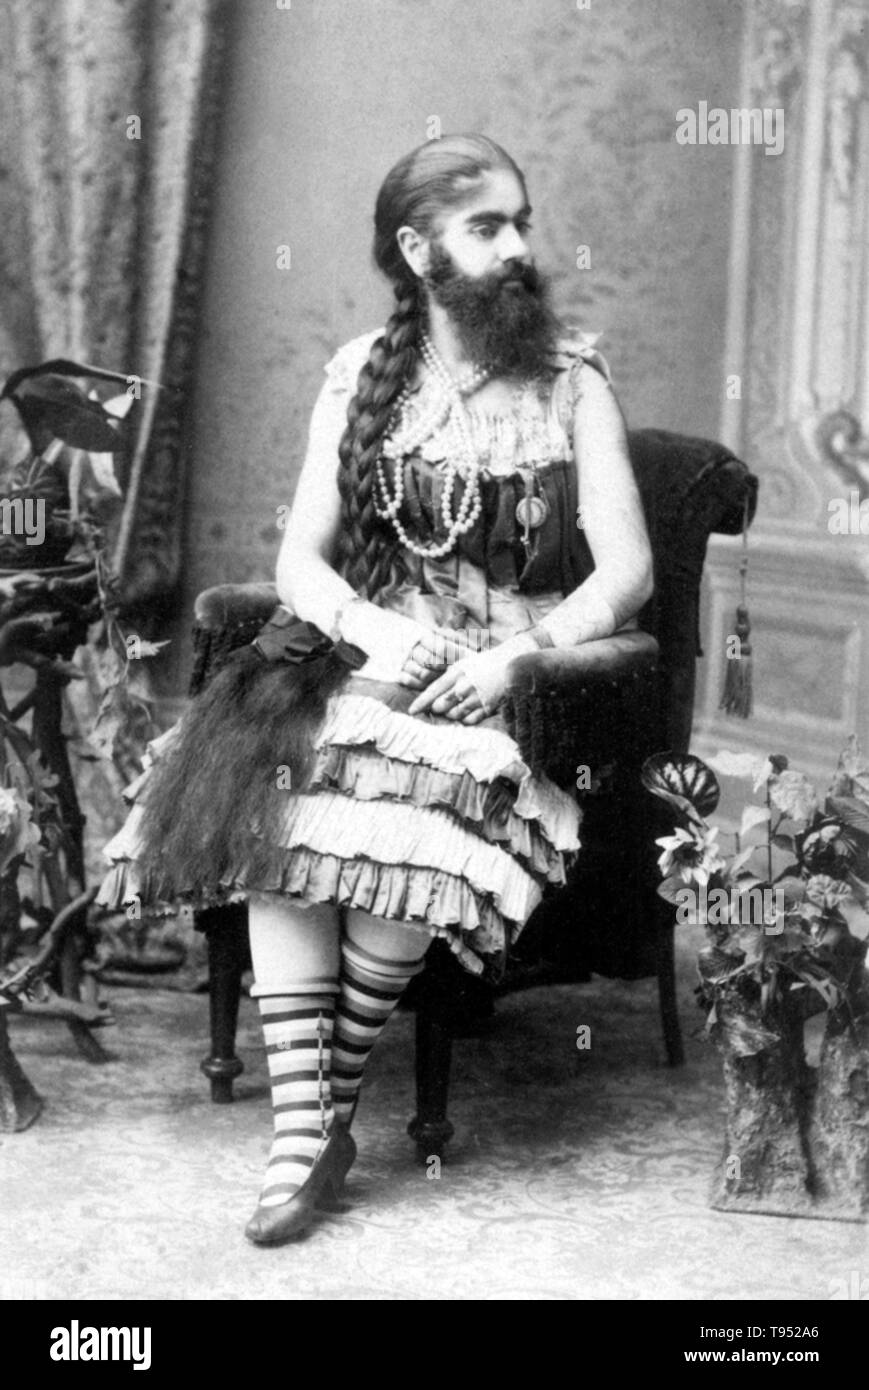 Annie Jones Elliot (July 14, 1865 - October 22, 1902) was an American bearded woman. She toured with showman P. T. Barnum as a circus attraction. Whether the cause of her condition was hirsutism or an unrelated genetic condition that affects children of both sexes and continues into adult years is unknown. Many photographers, including Mathew Brady, took her portraits during her lifetime, which were widely distributed. Stock Photo